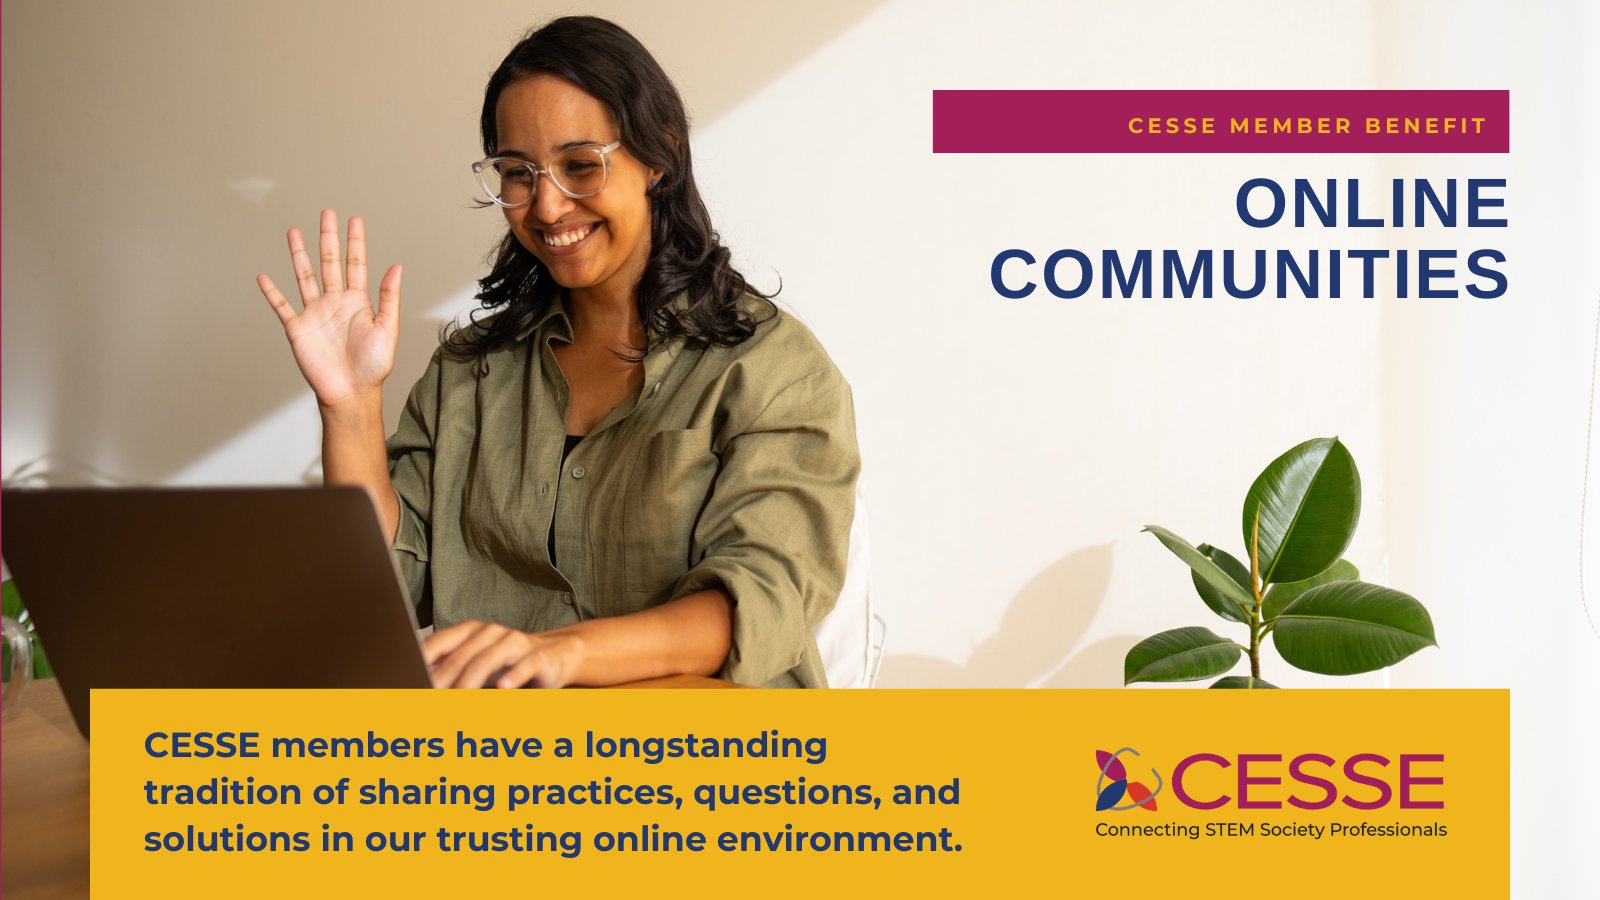 CESSE - Connecting STEM Society Professionals